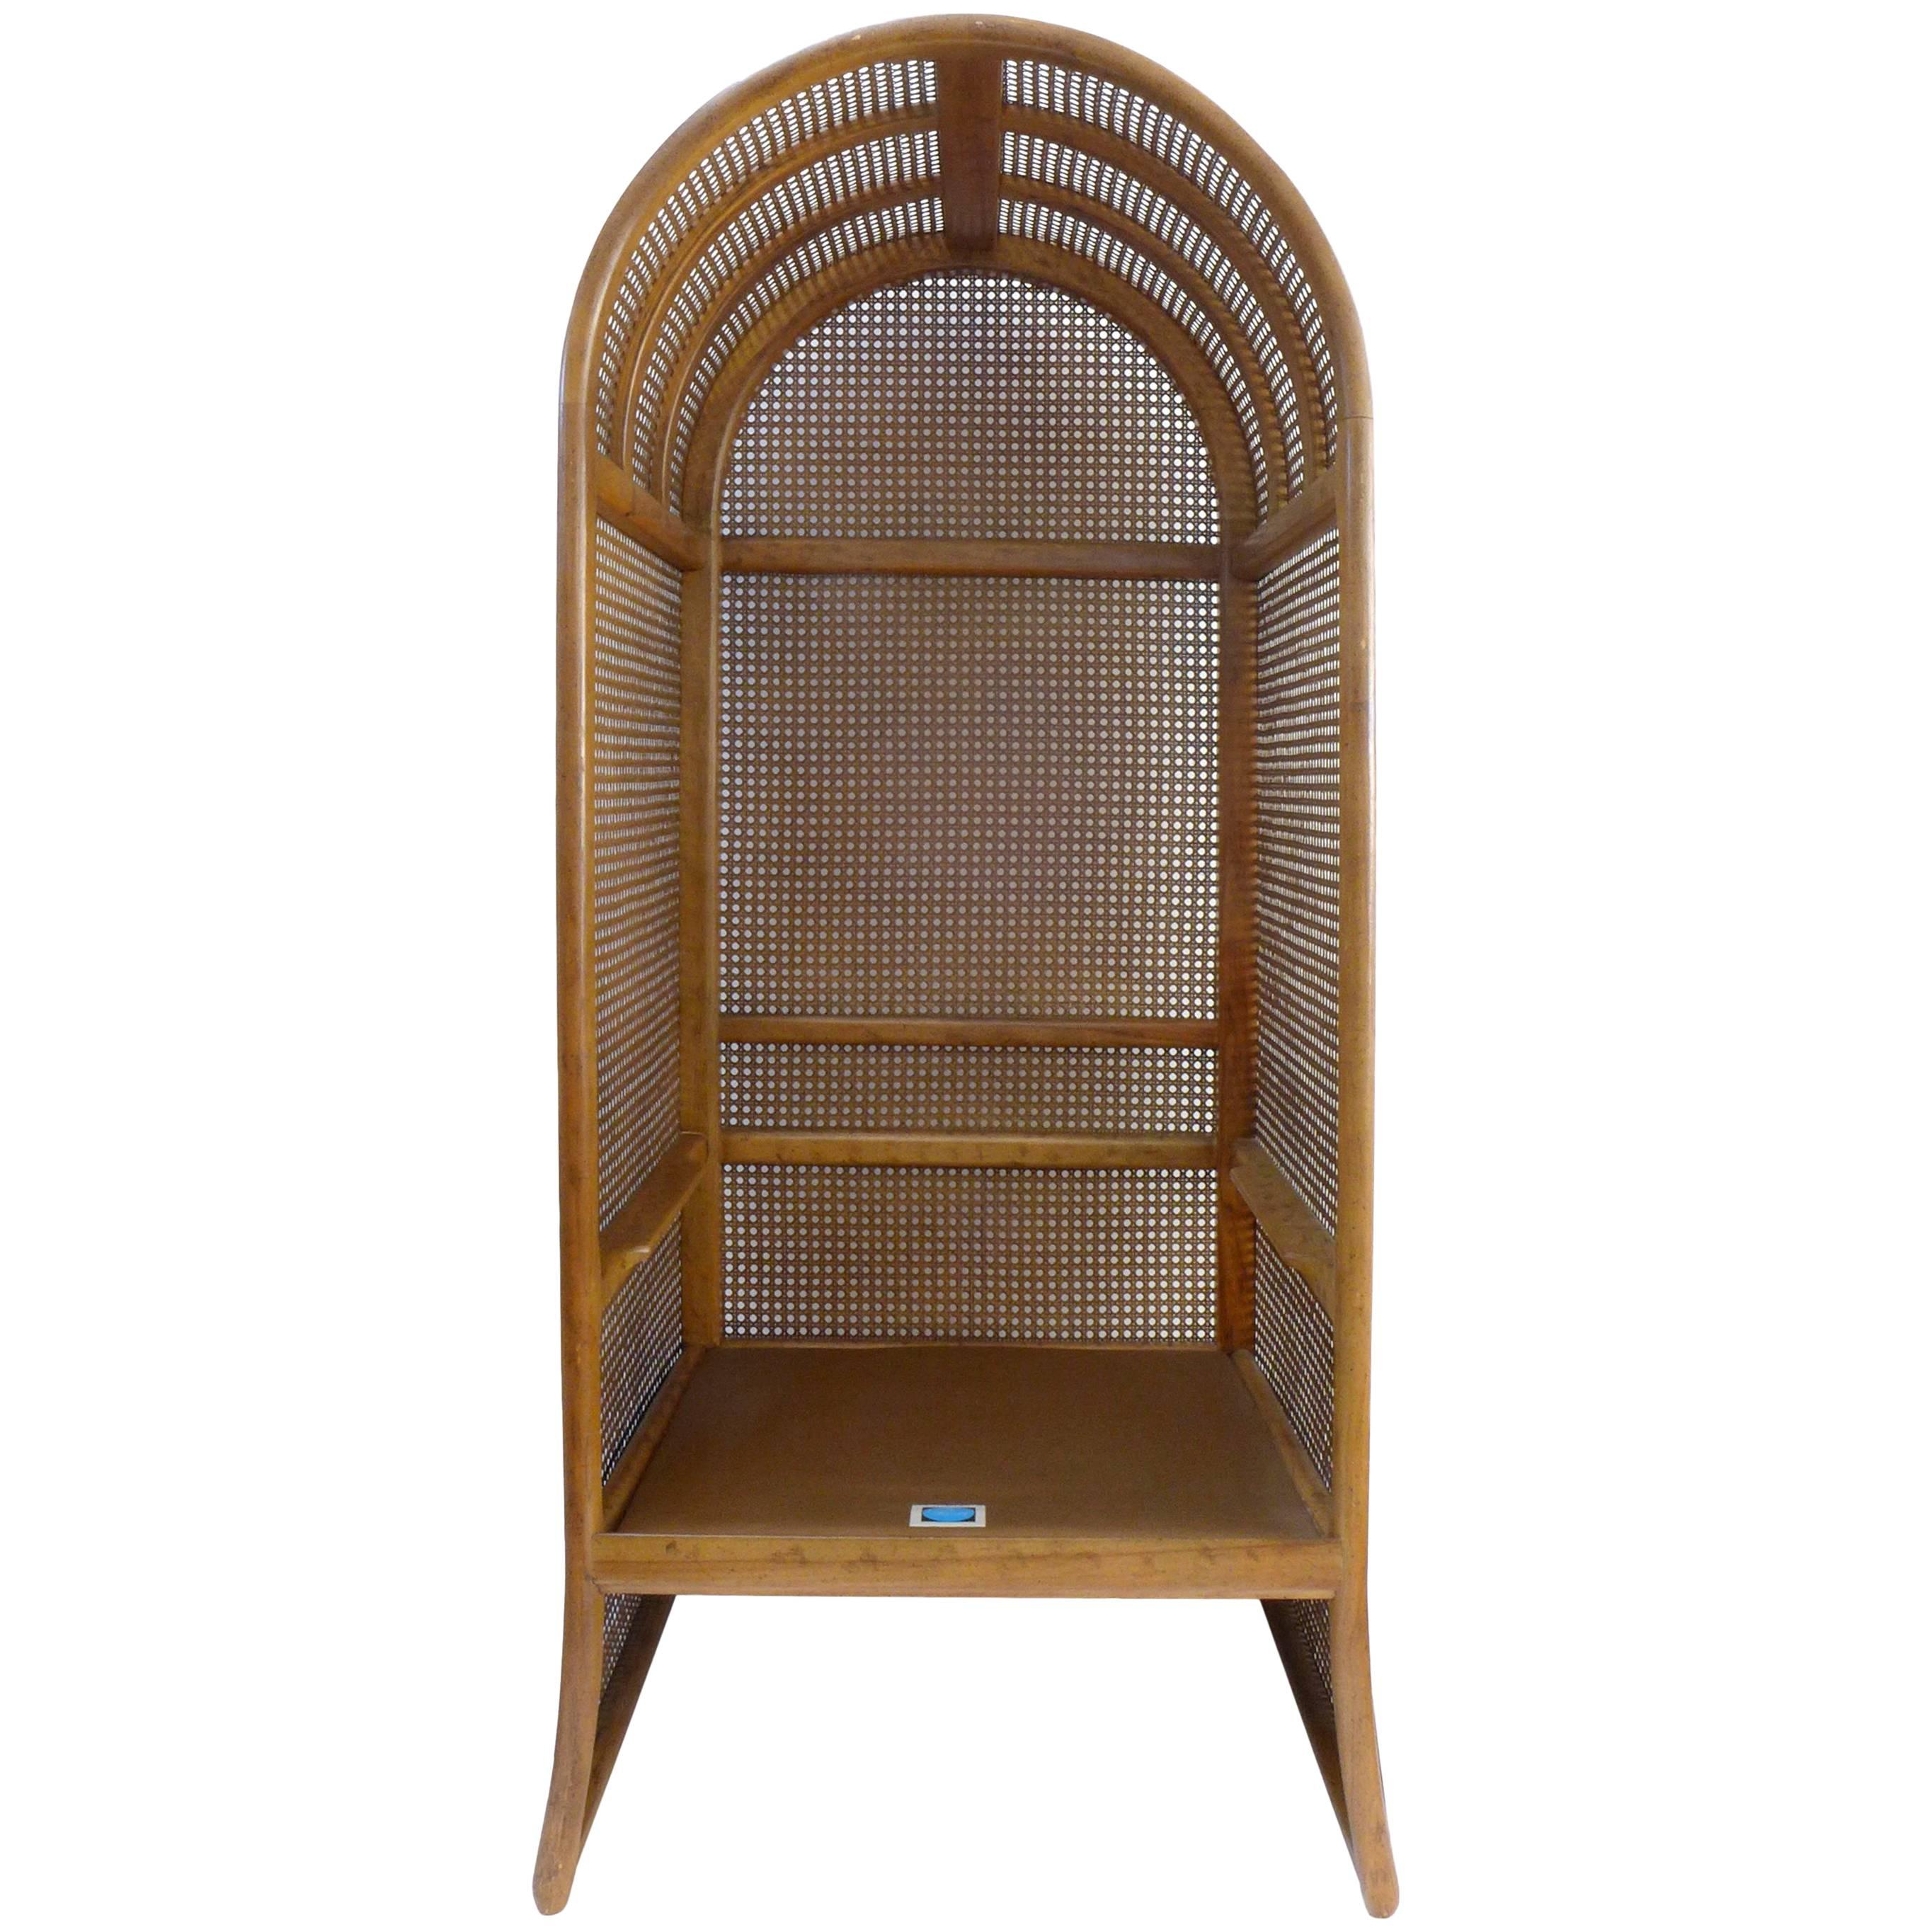 A monumental, wood and woven rattan canopy chair by Drexel. A fantastic, atrium-evoking, wood substructure fully clad in woven rattan. A sublimely inviting, one-seat sanctuary of impressive scale and proportion. Quality construction and materials,